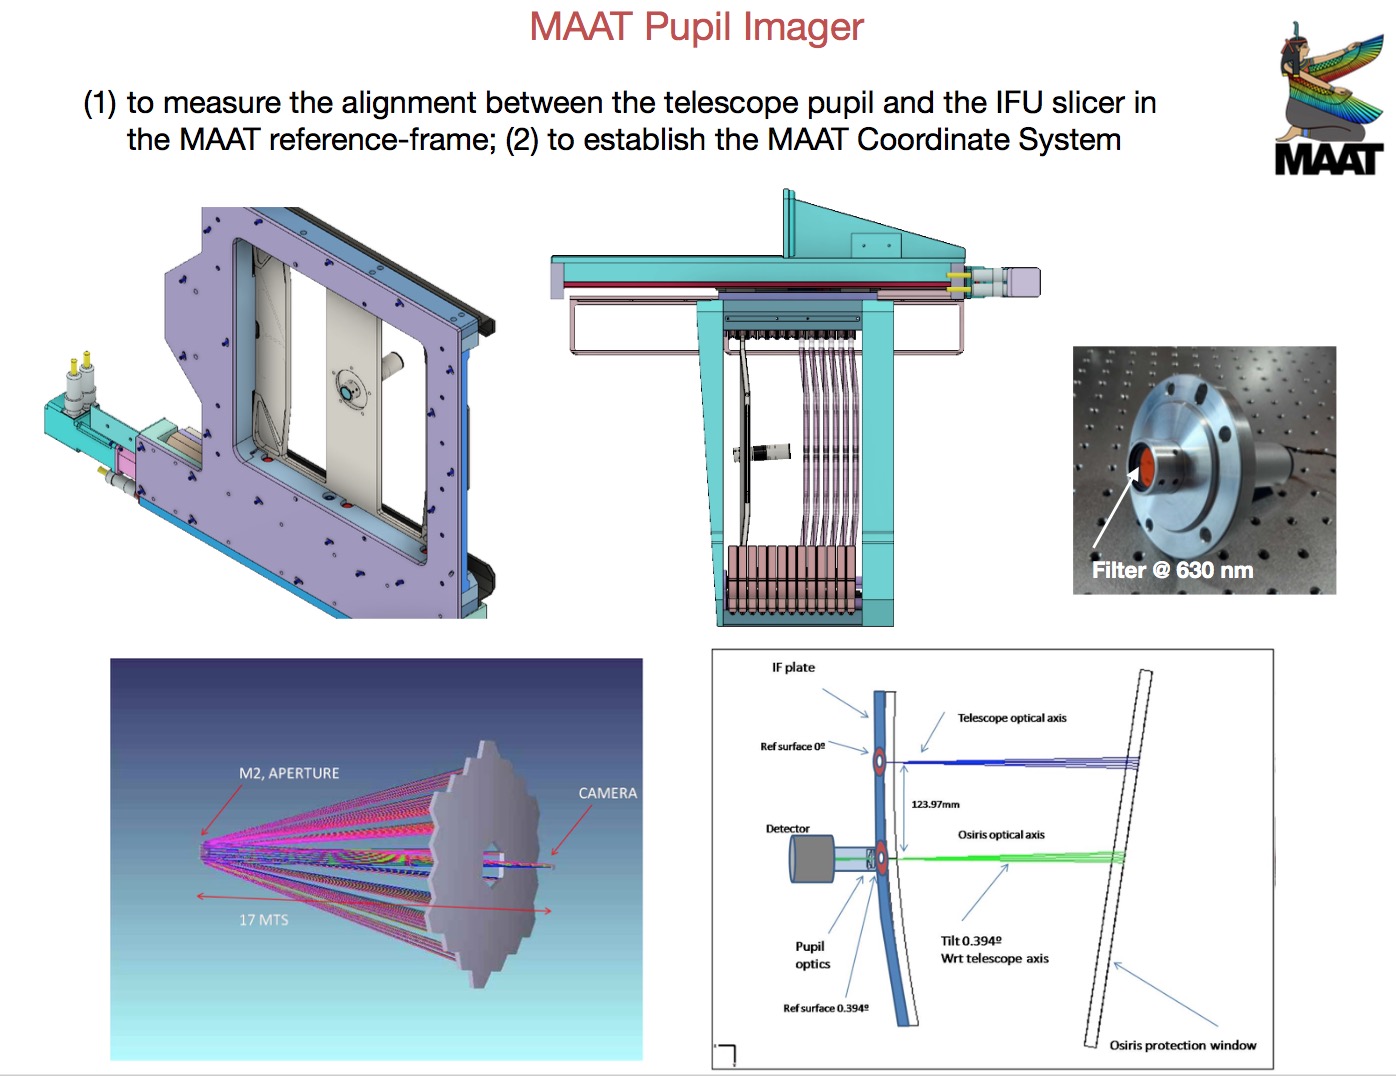 The MAAT Pupil Imager